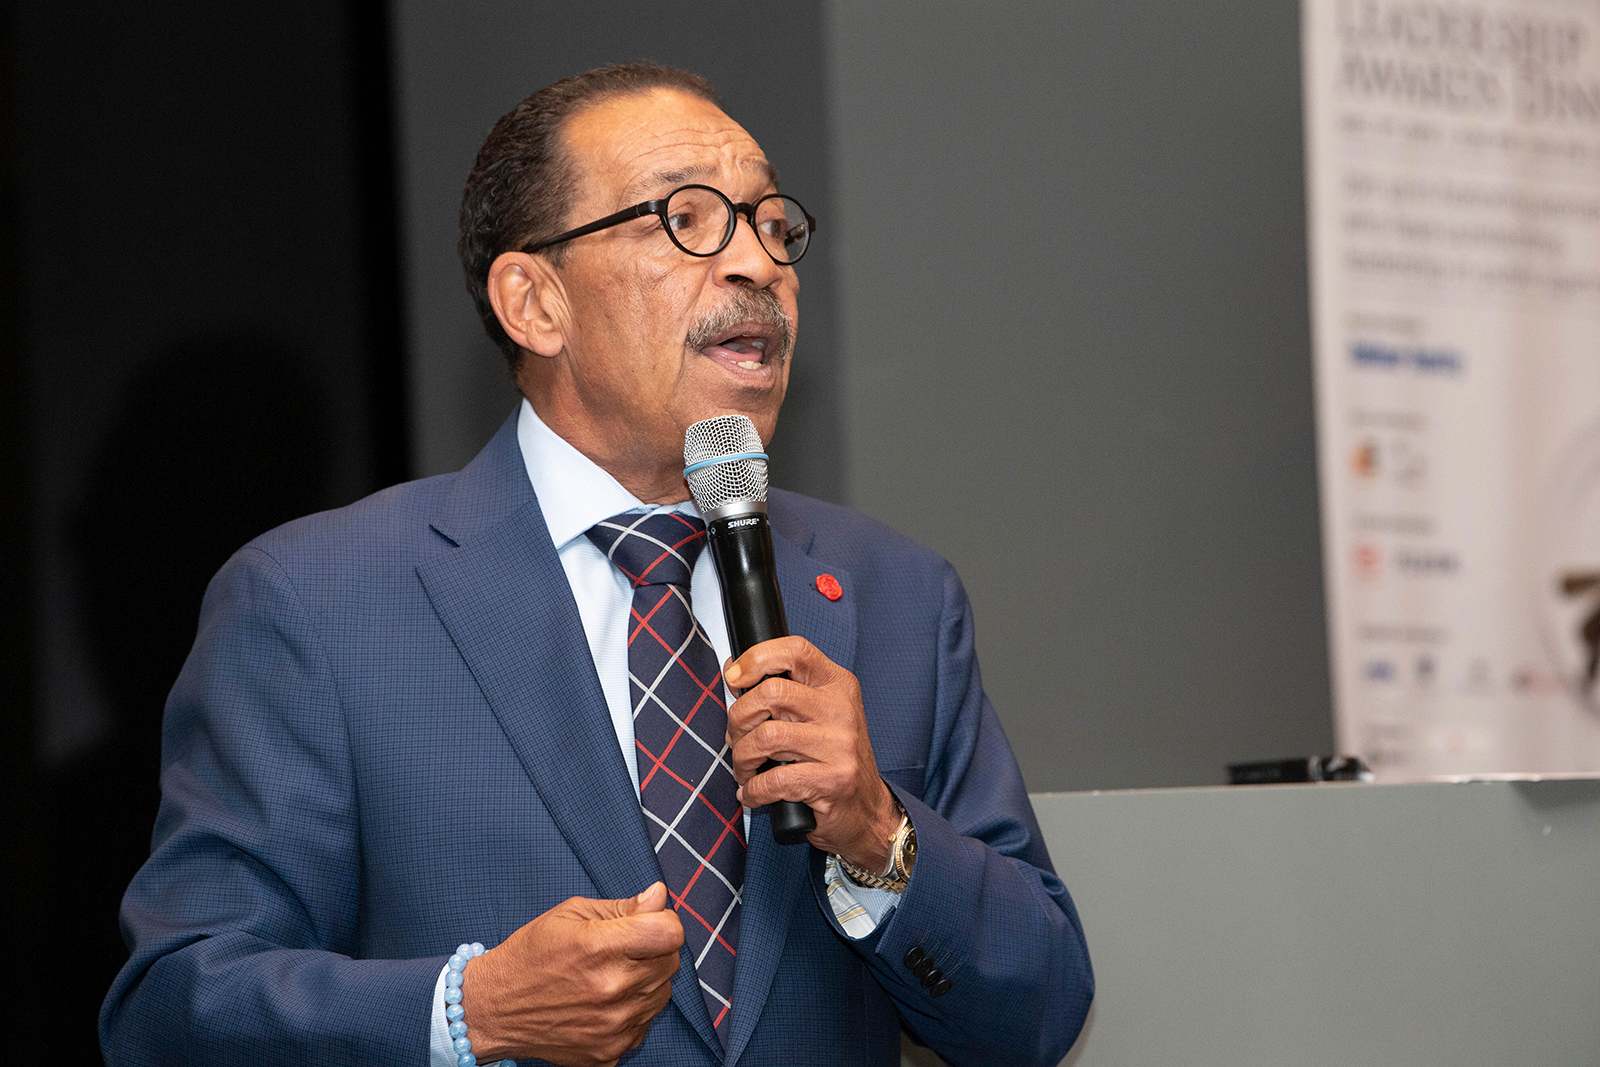 Herb Wesson Jr., President of the Los Angeles City Council, speaks at the City Club in Los Angeles on December 3, 2019